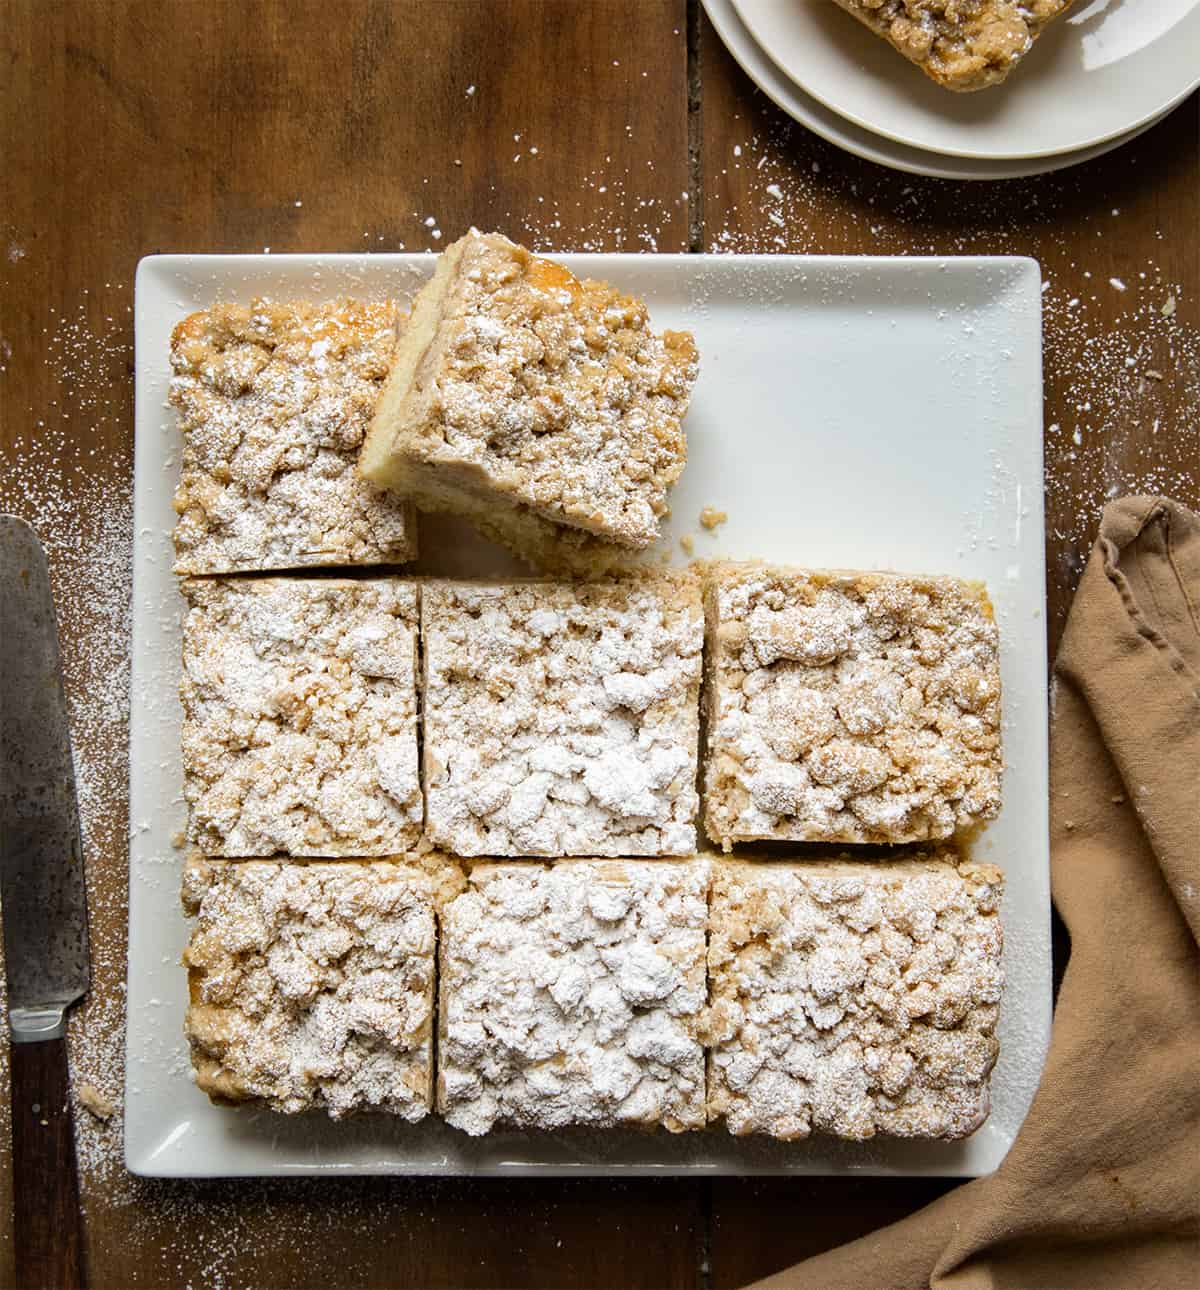 Plate with Crumb Cake on it cut into pieces with one piece on its side. 